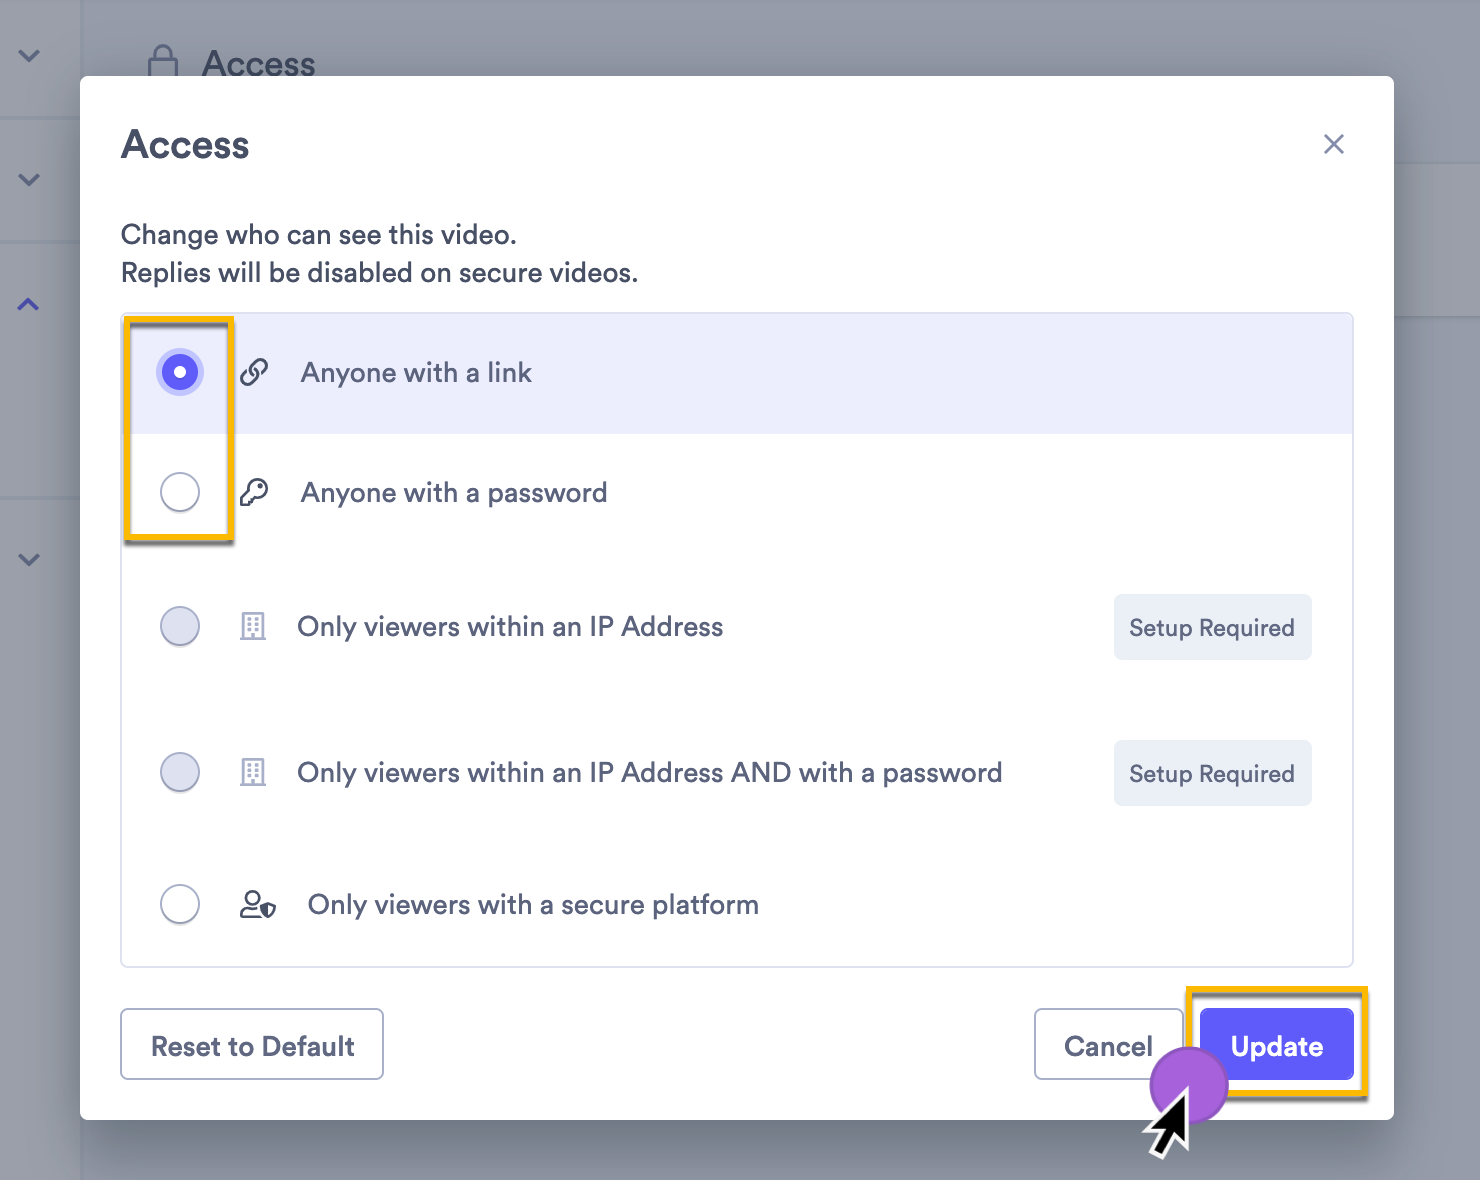 Selecting a new access setting for the video